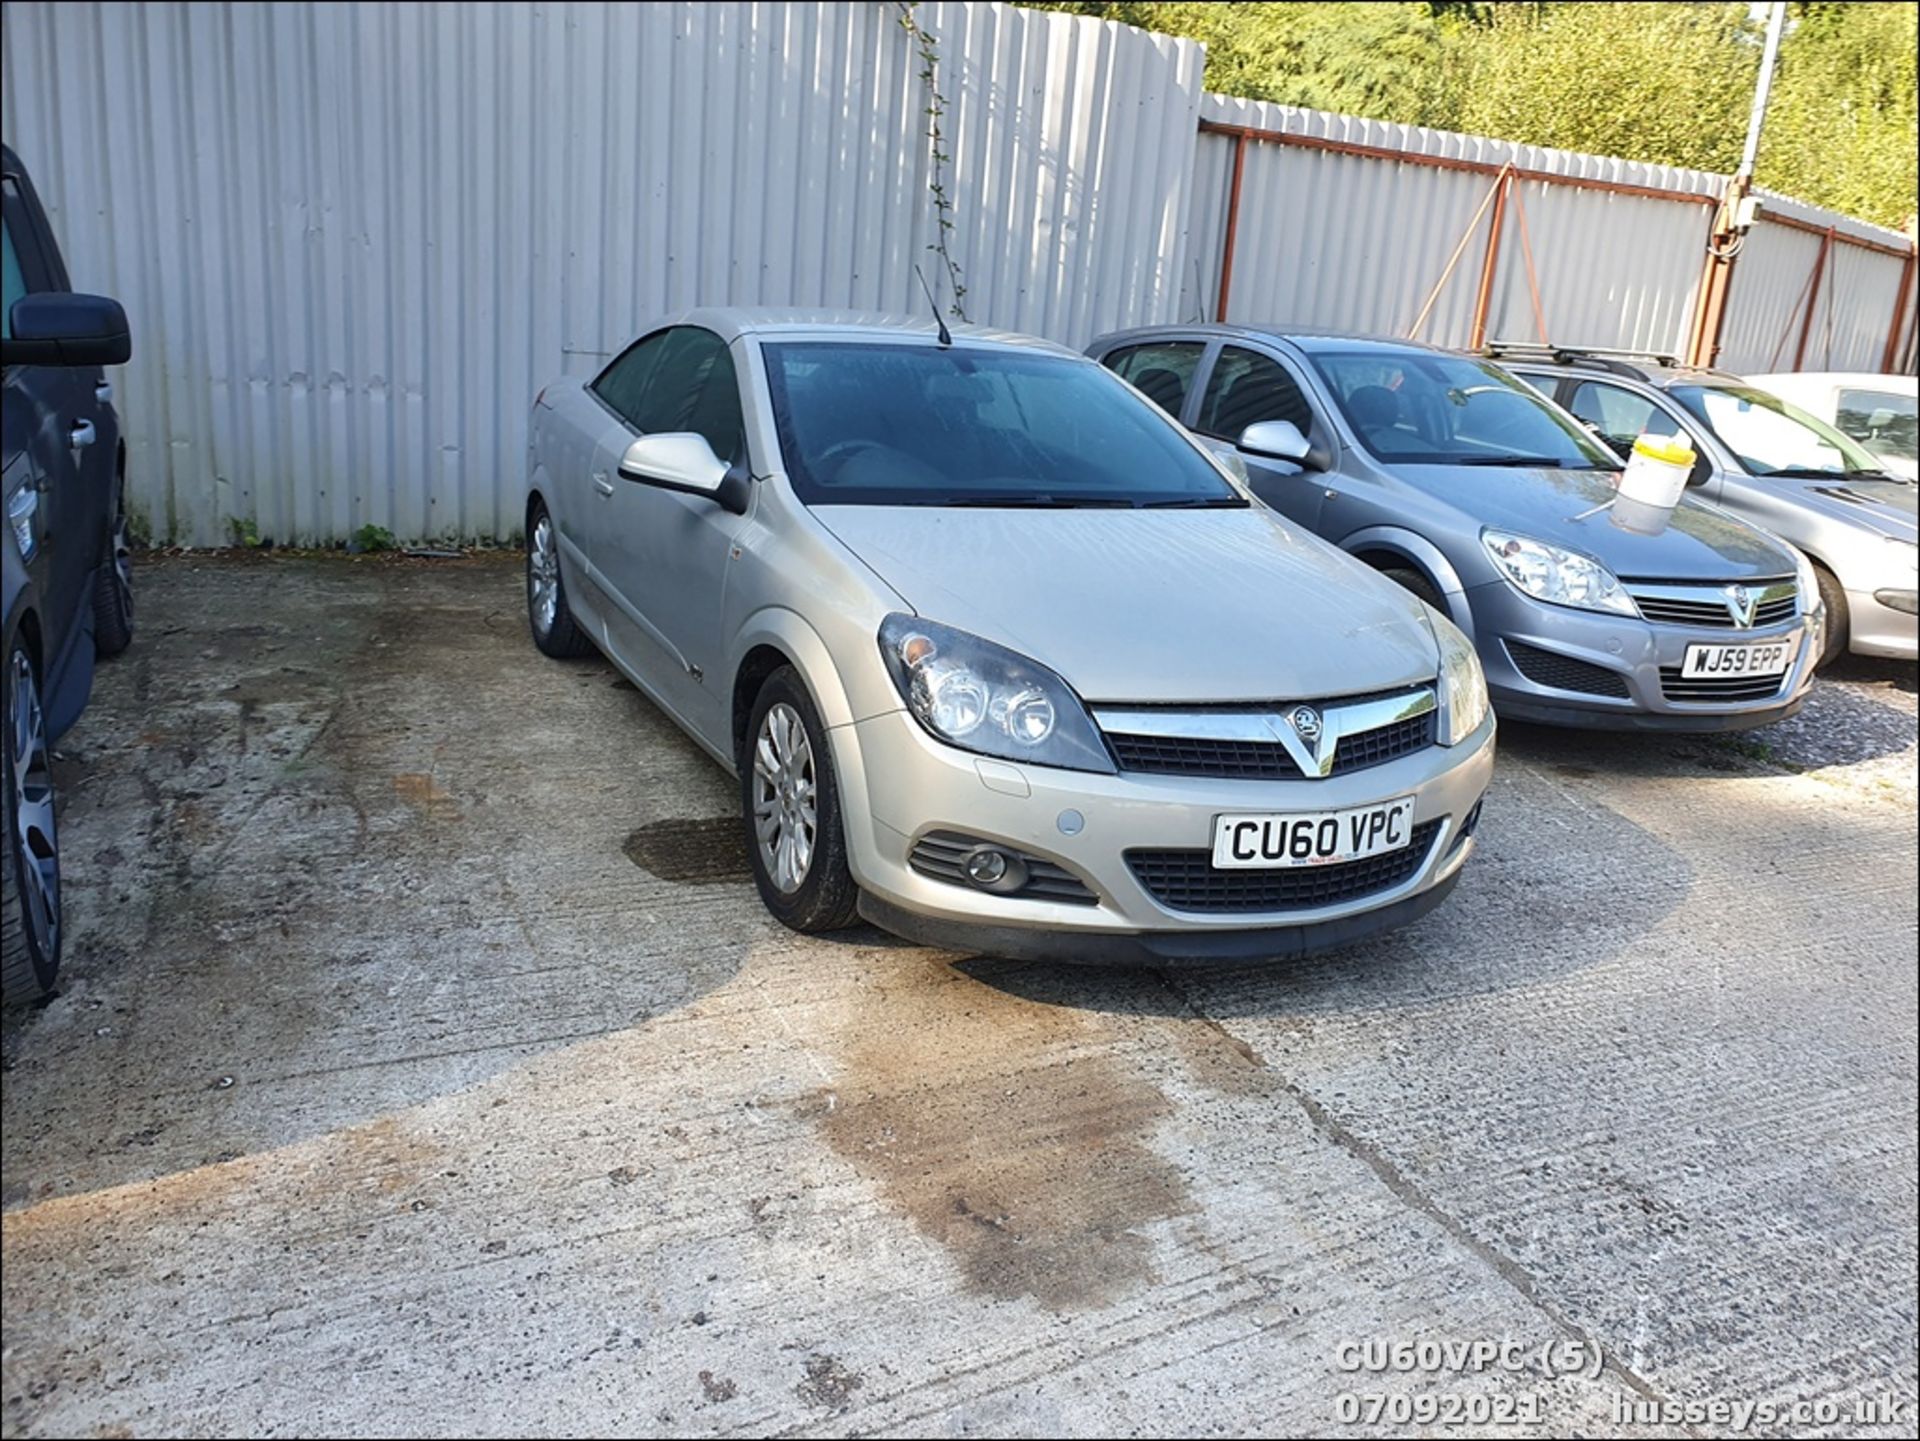 11/60 VAUXHALL ASTRA SPORT - 1796cc 2dr Convertible (Silver, 123k) - Image 4 of 12